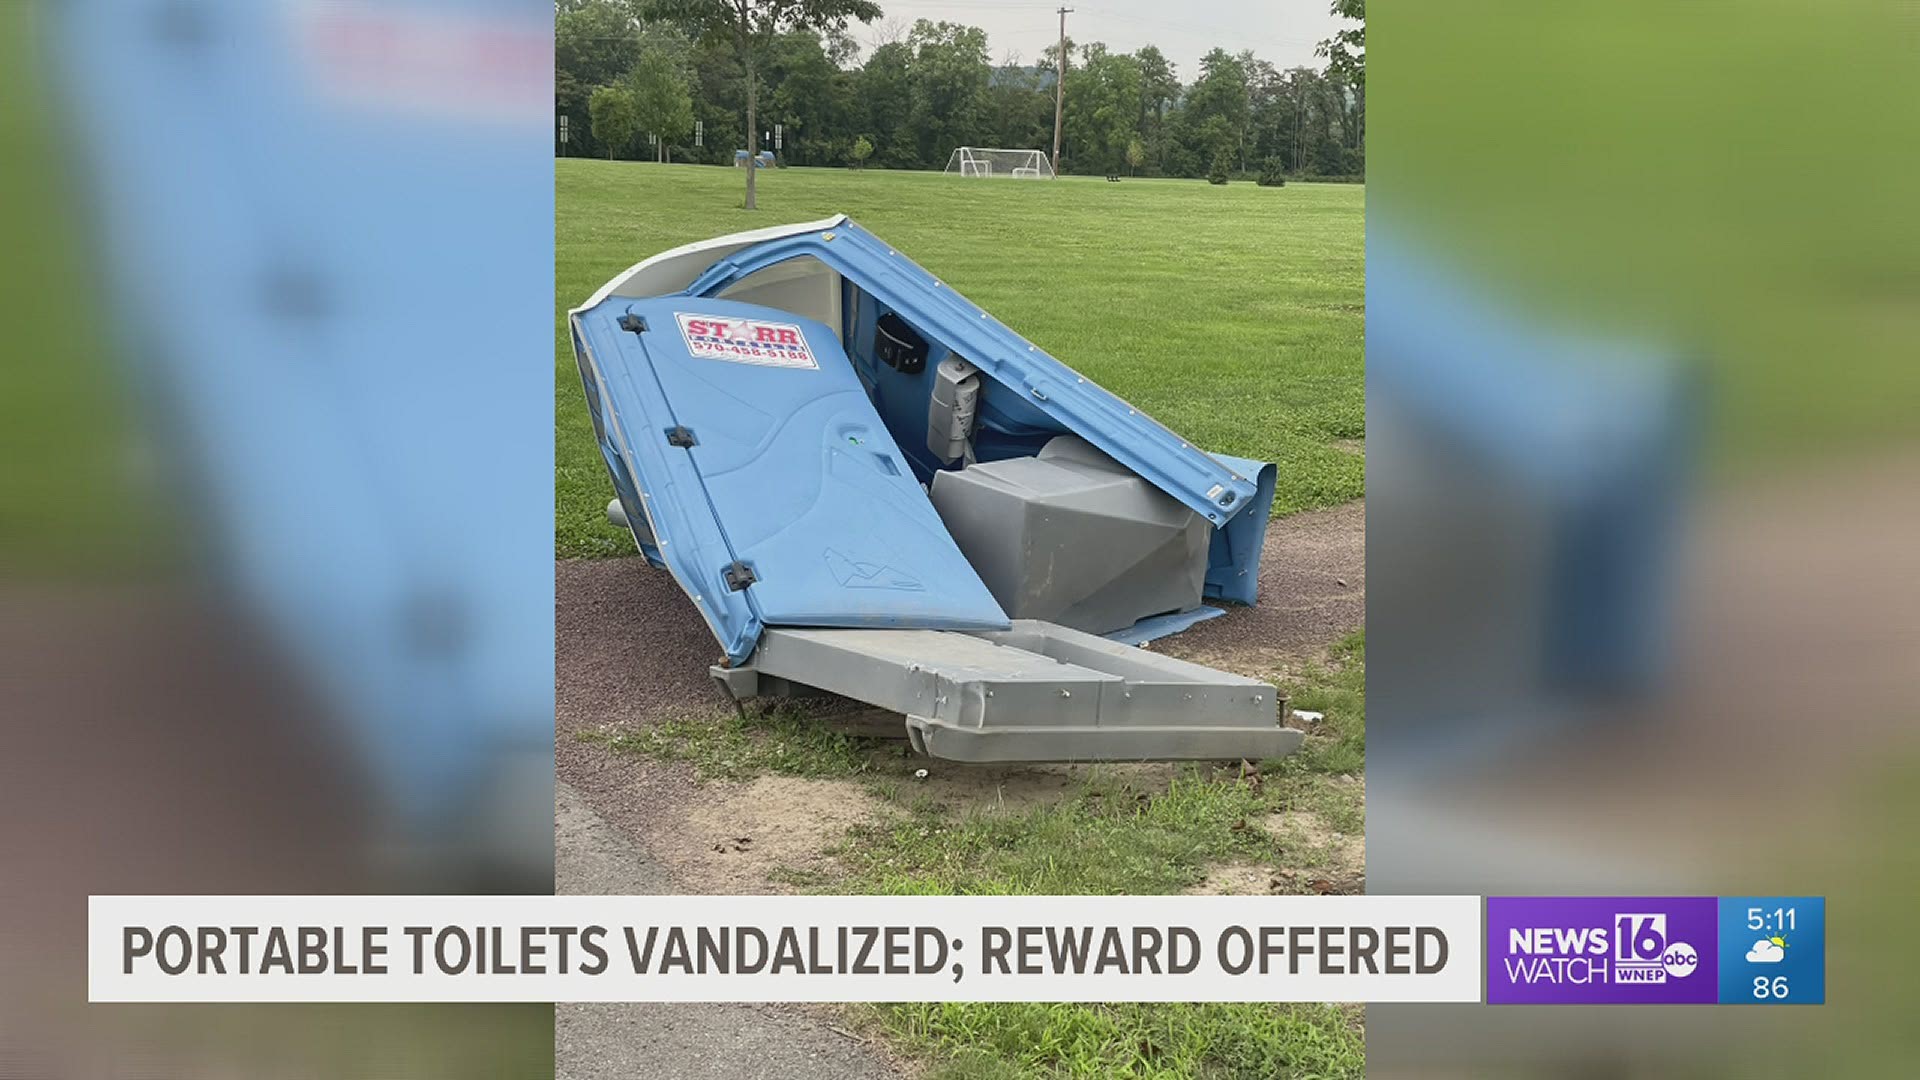 A man from Millville wants to know who destroyed his company's portable toilets, and he is offering a $500 reward for information.